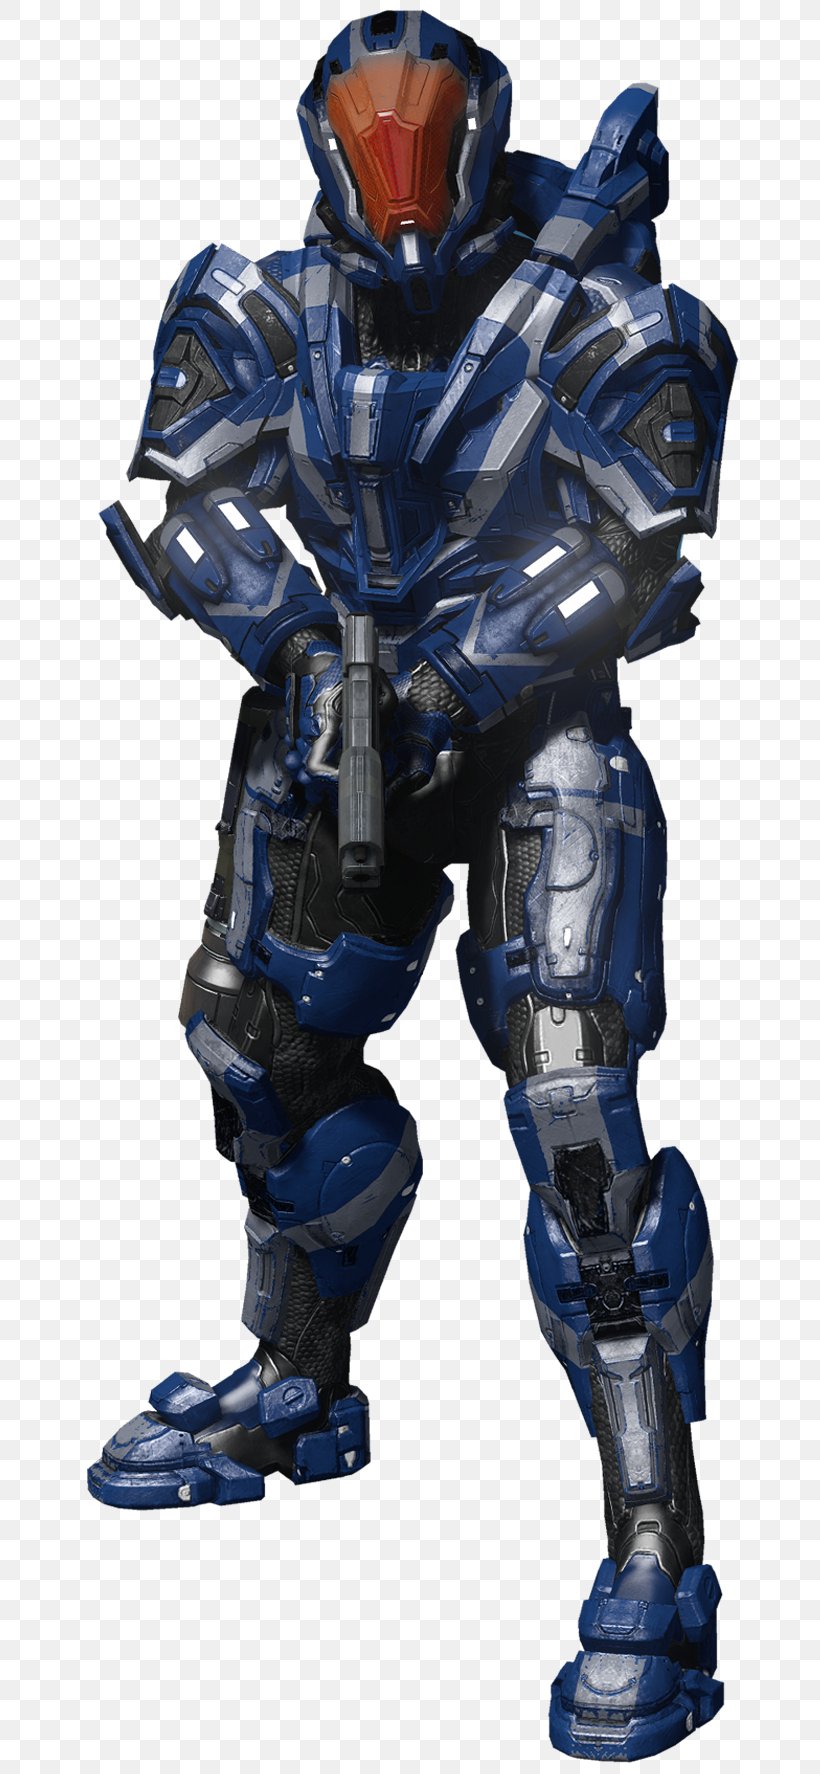 Halo 4 Halo 5: Guardians Halo Wars 2 Halo 3 Halo 2, PNG, 680x1774px, 343 Industries, Halo 4, Action Figure, Armour, Emblem Download Free